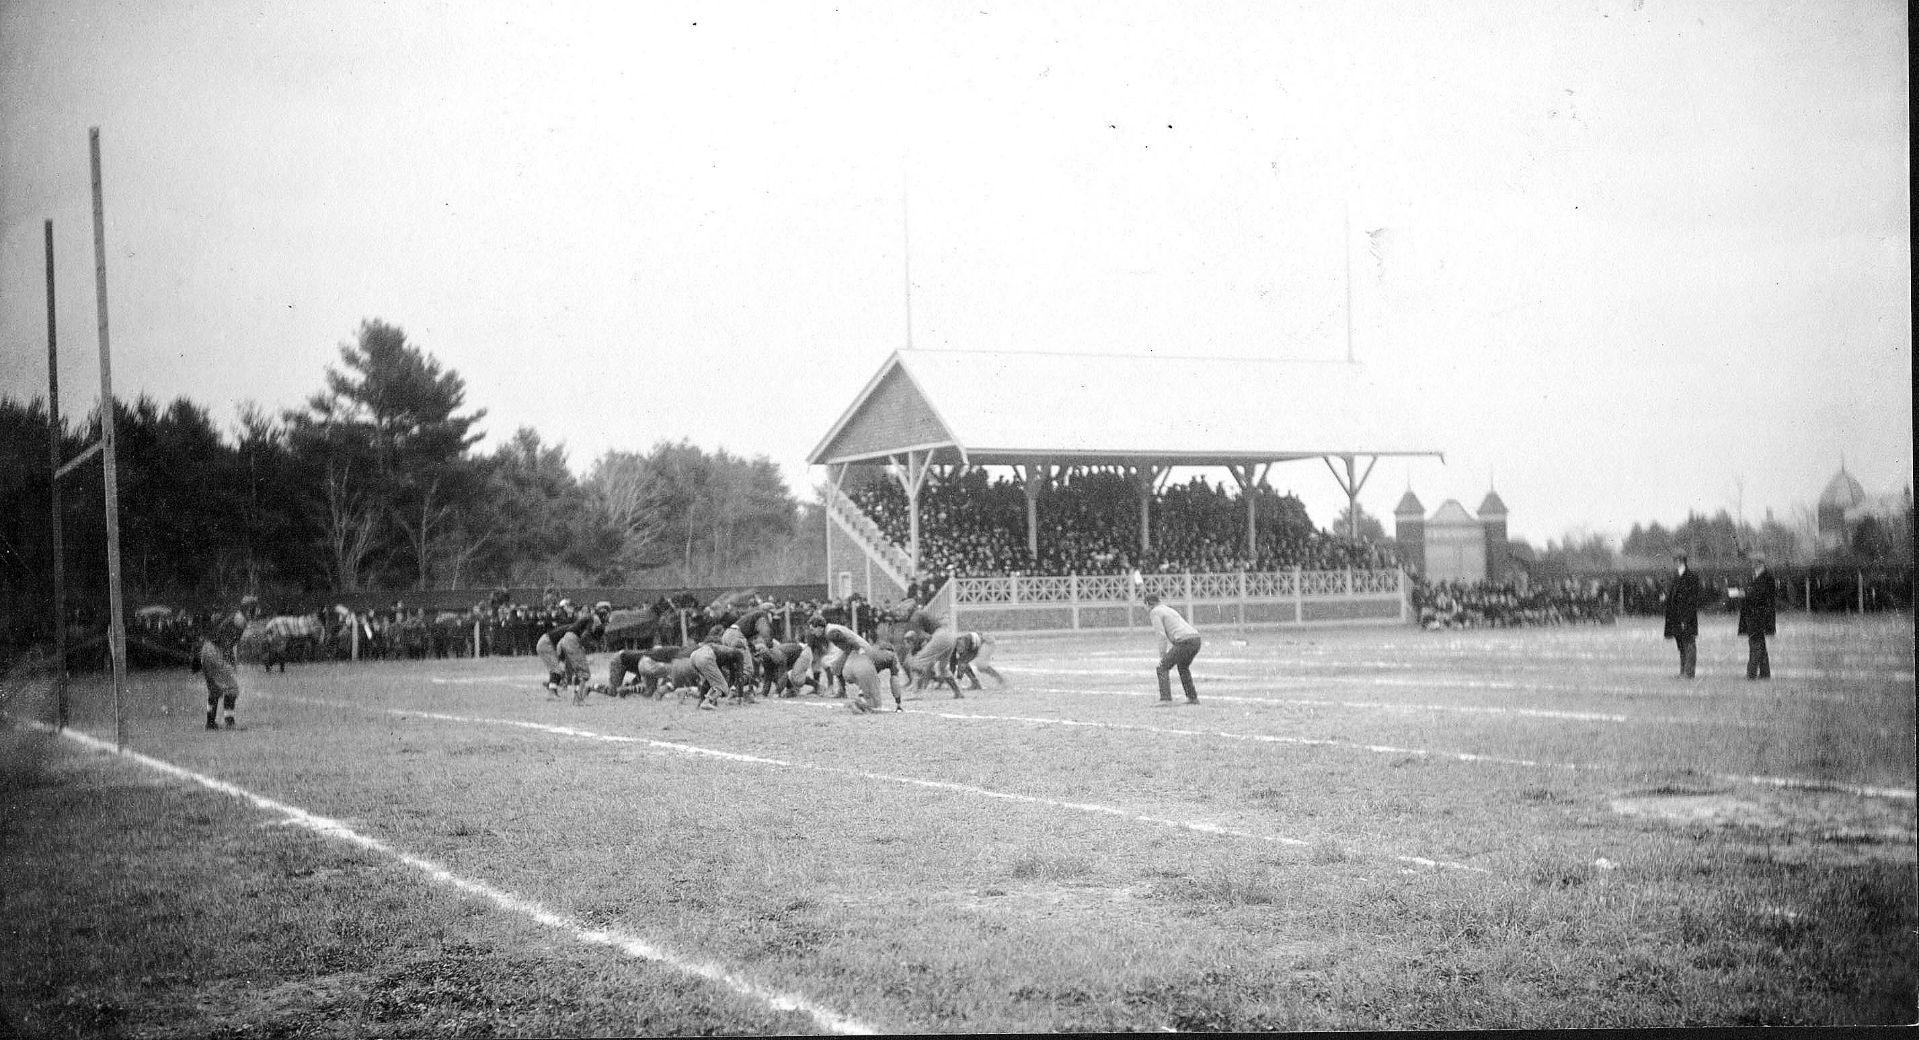 Two years after the 1899 completion of Garcelon Field, Bates and Bowdoin square off in football in November 1901. Bates won, 11-0. (Muskie Archives and Special Collections Library)